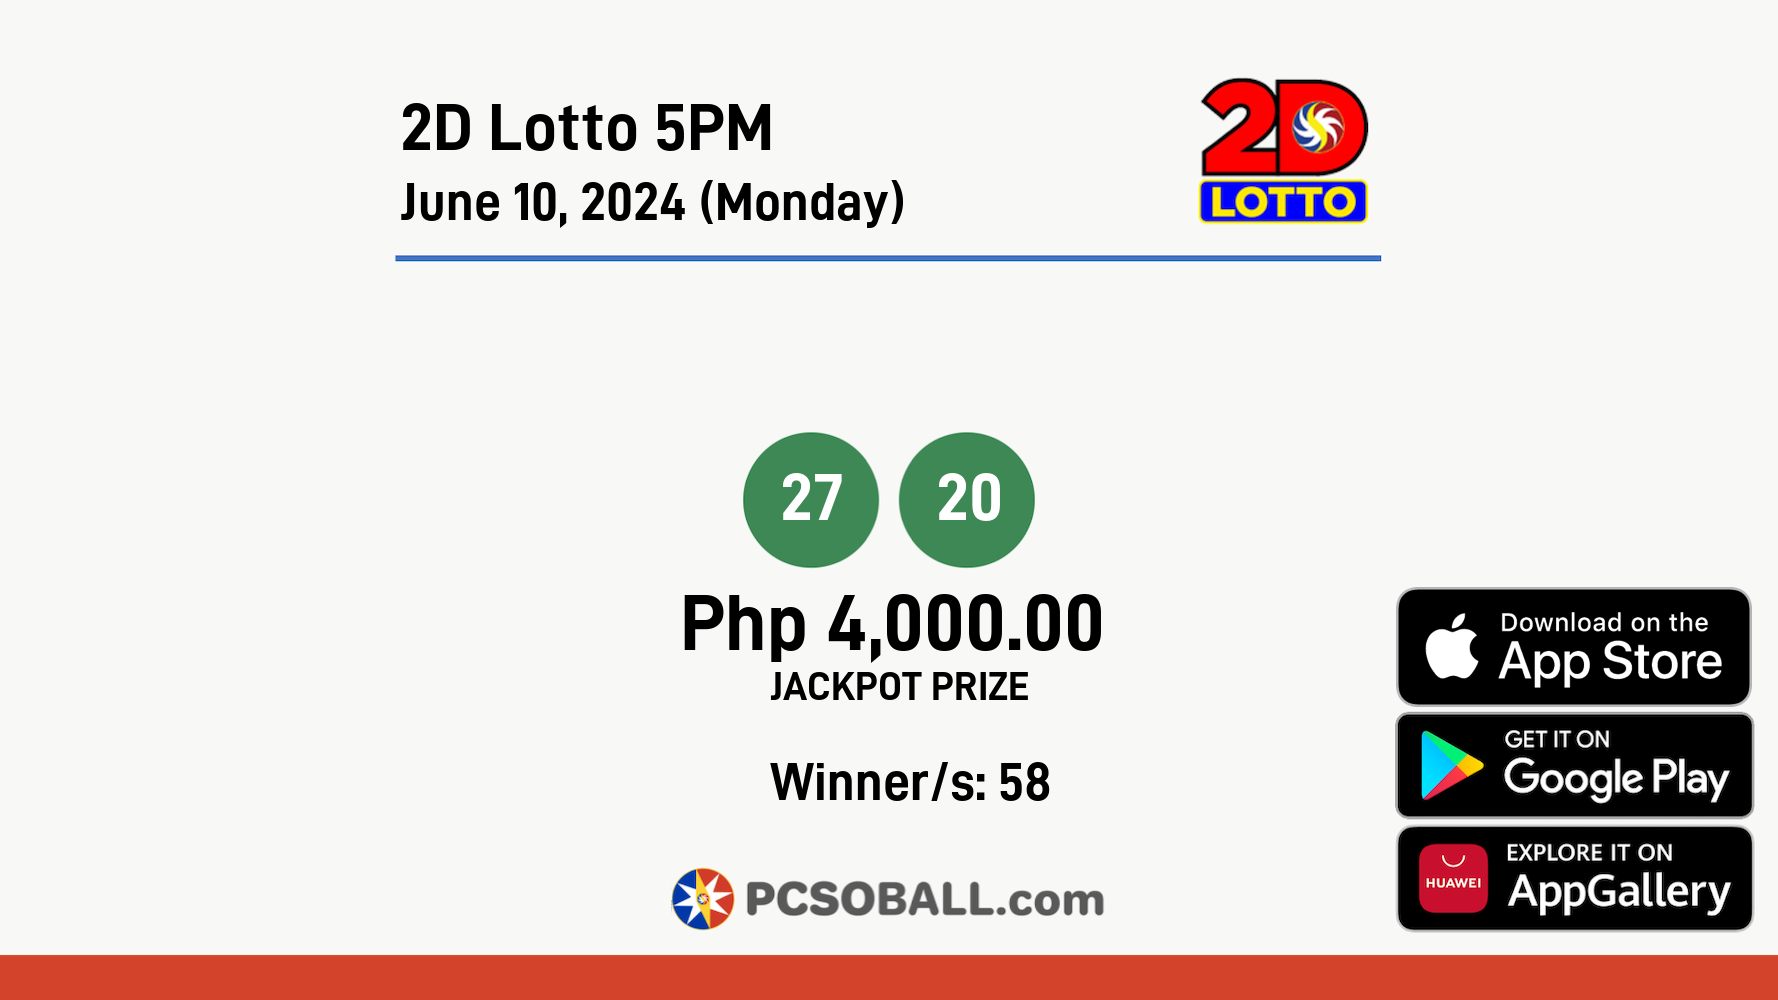 2D Lotto 5PM June 10, 2024 (Monday) Result